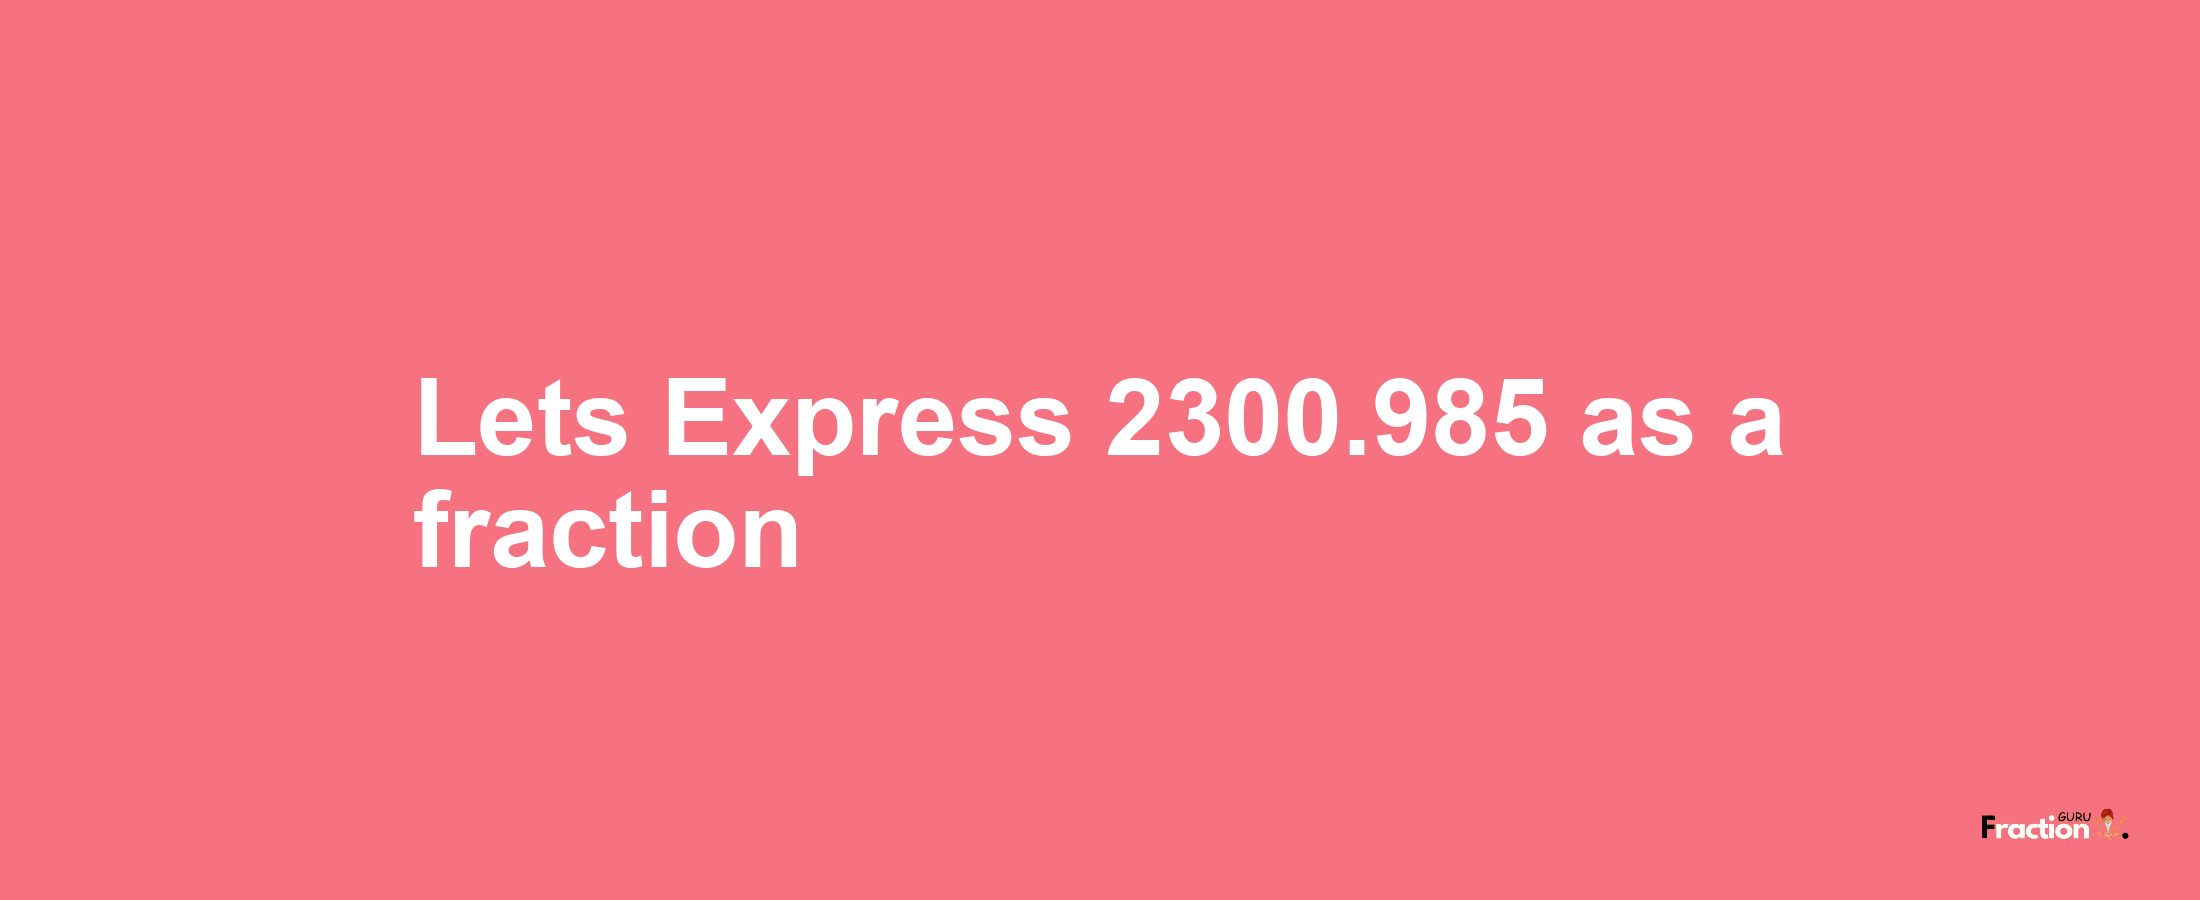 Lets Express 2300.985 as afraction